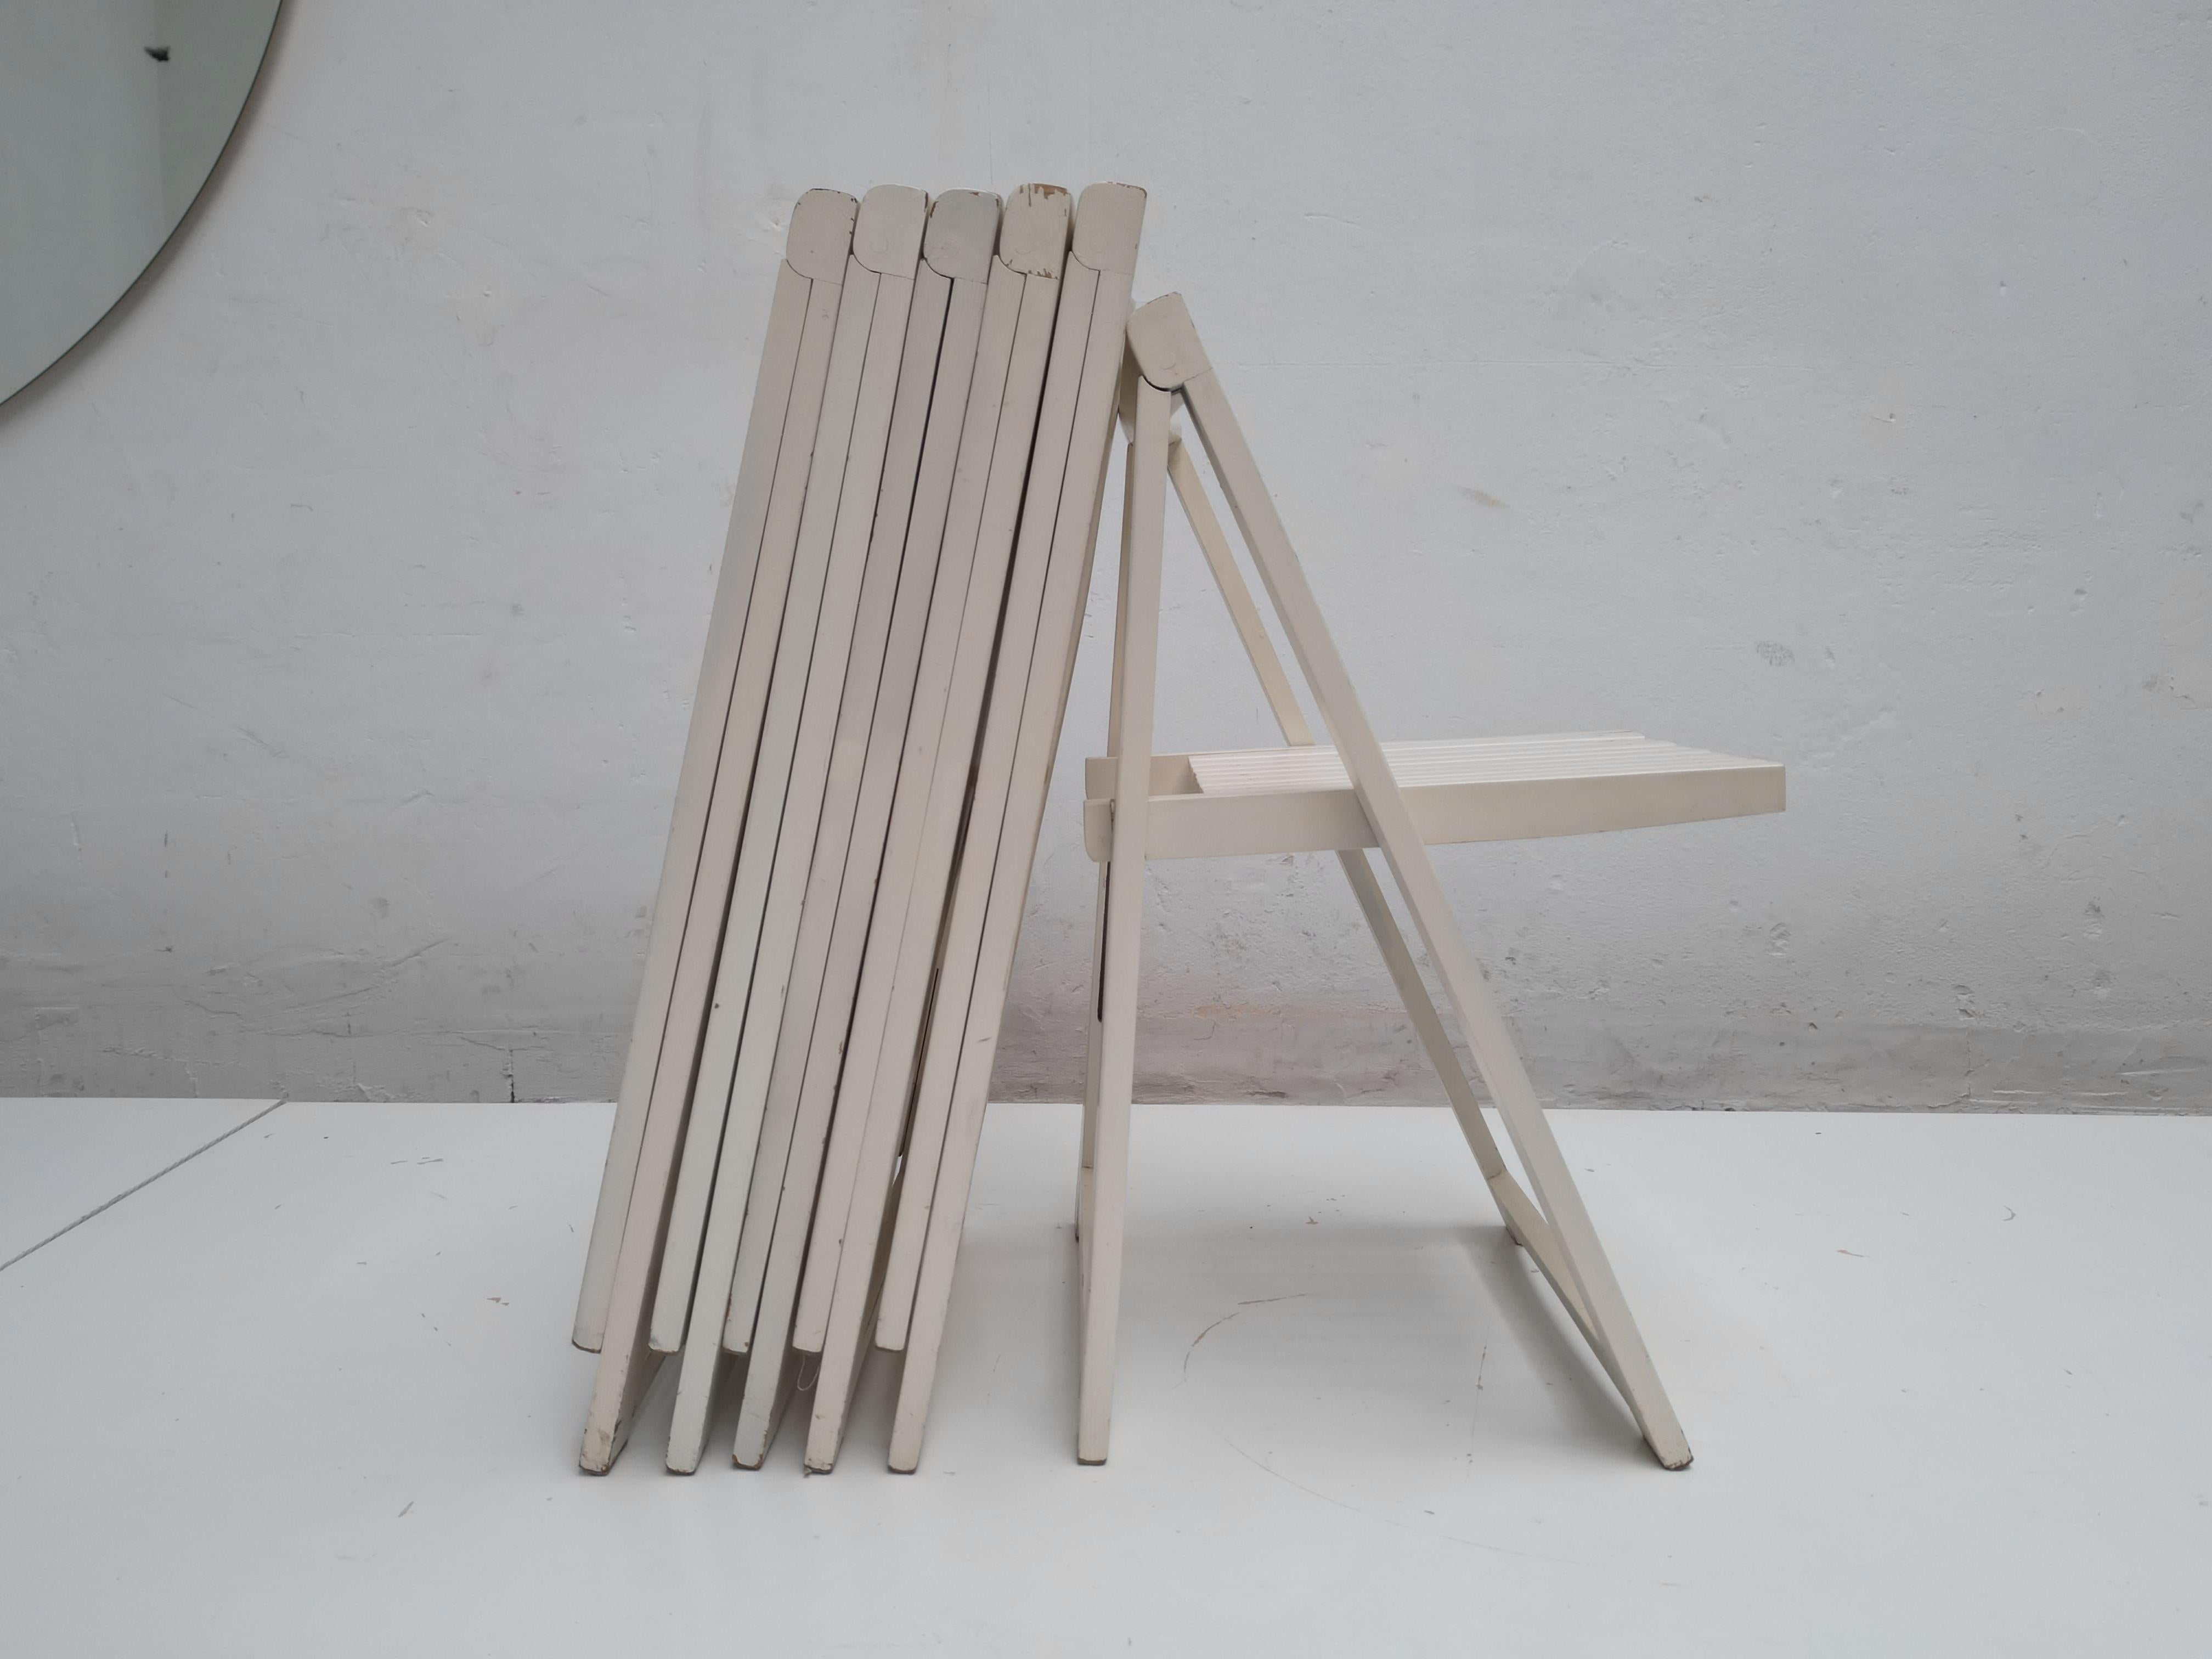 Mid-Century Modern 6 White Folding Chairs Attributed to Aldo Jacober for Alberto Bazzani Italy 1966 For Sale